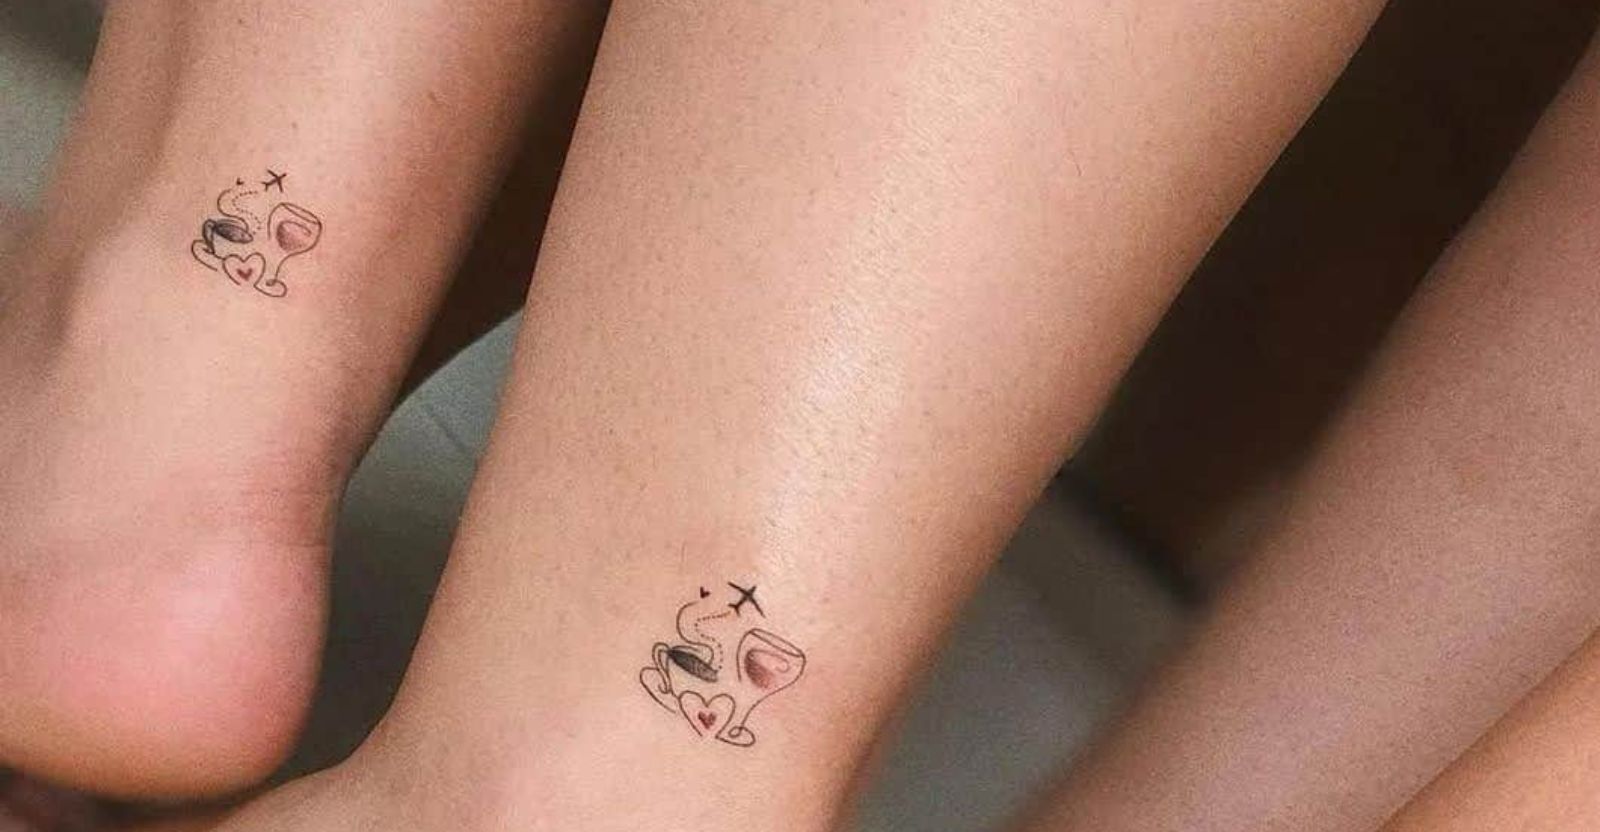 Best Friend Tattoos: 21 Tattoo Ideas to Get With Your BFF